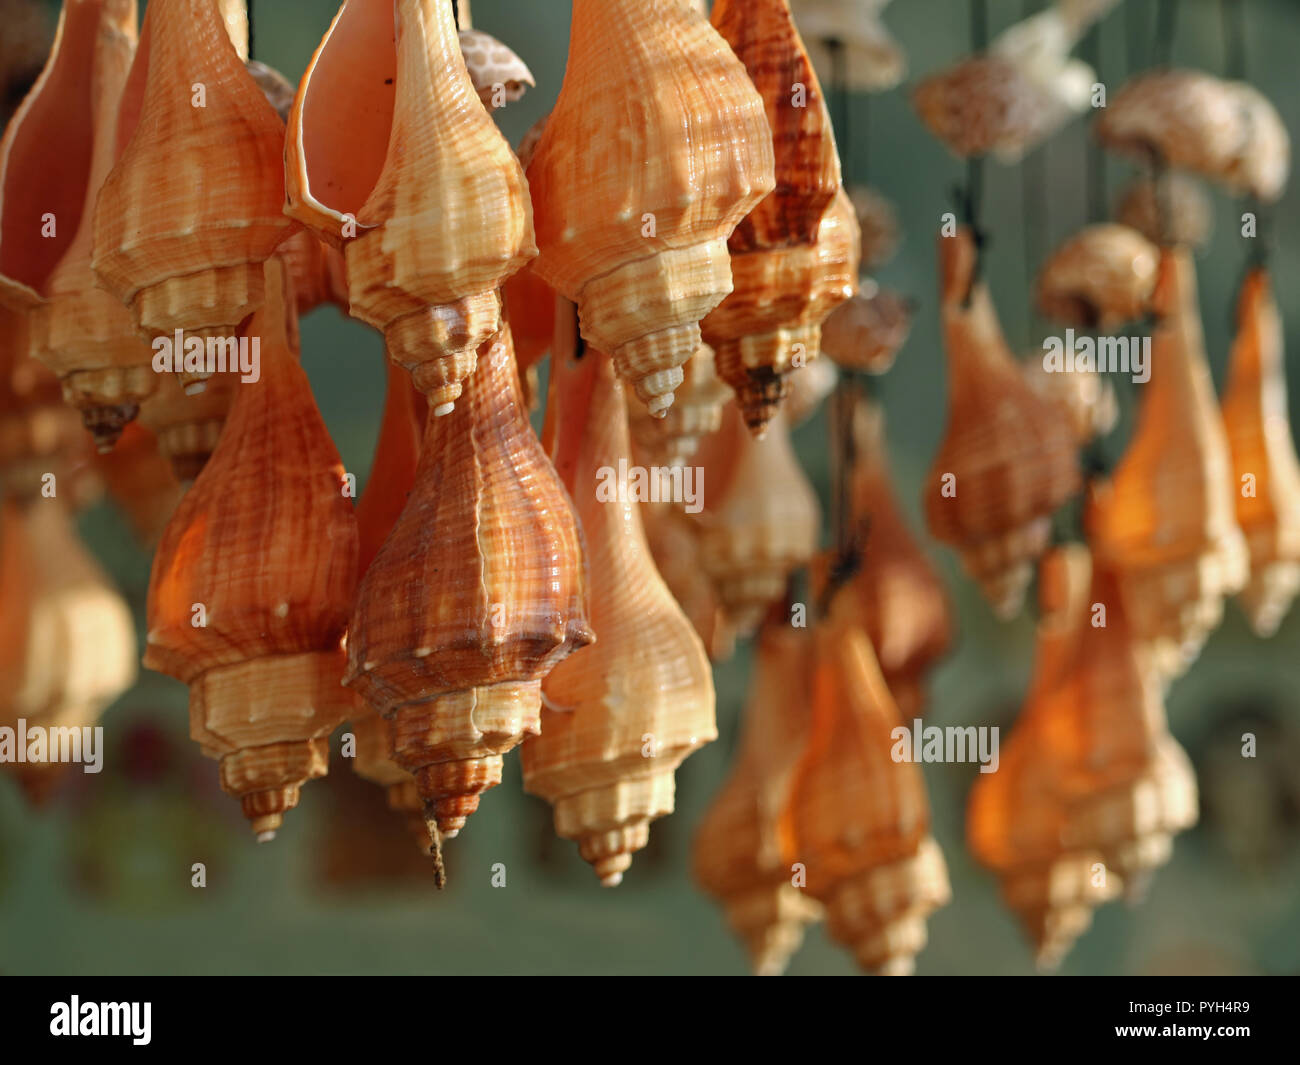 hanging seashell necklace for sale at a souvenir shop Stock Photo